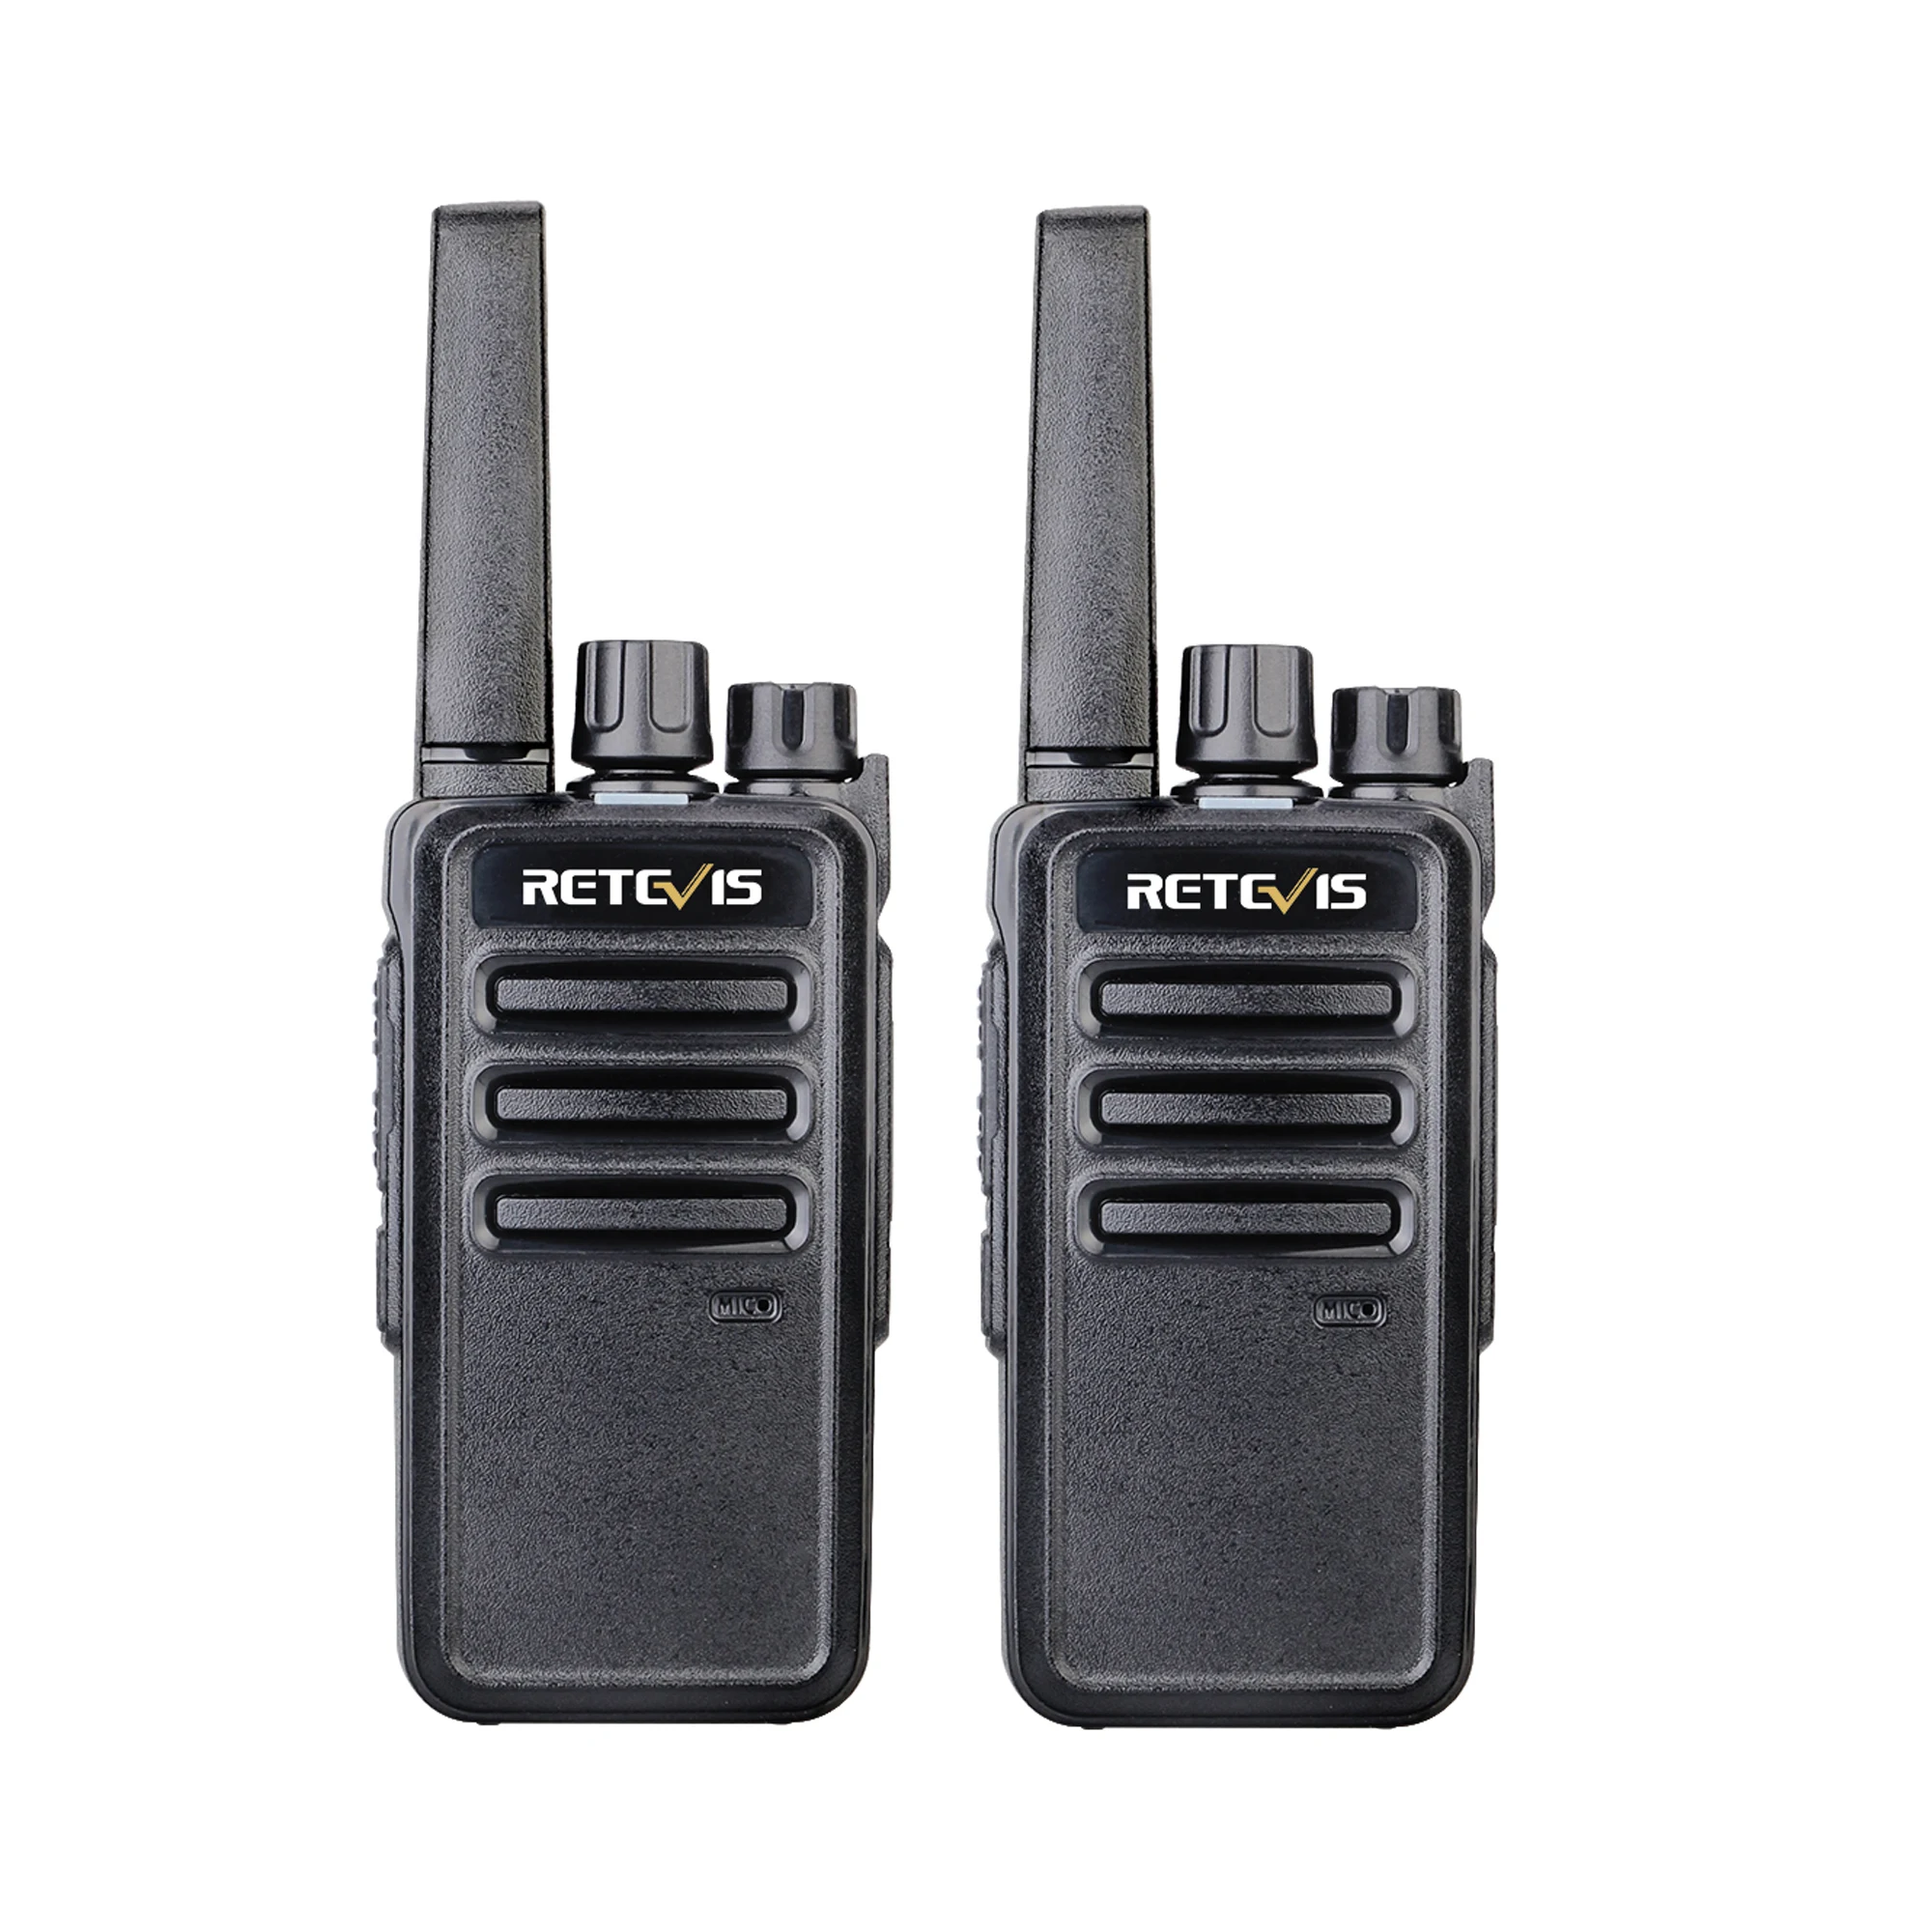 

2021 New walkie talkie Retevis RT68 2W license free FRS 16Channels CTCSS/DCS TOT VOX Scan Two Way Radio for storage wharf touris